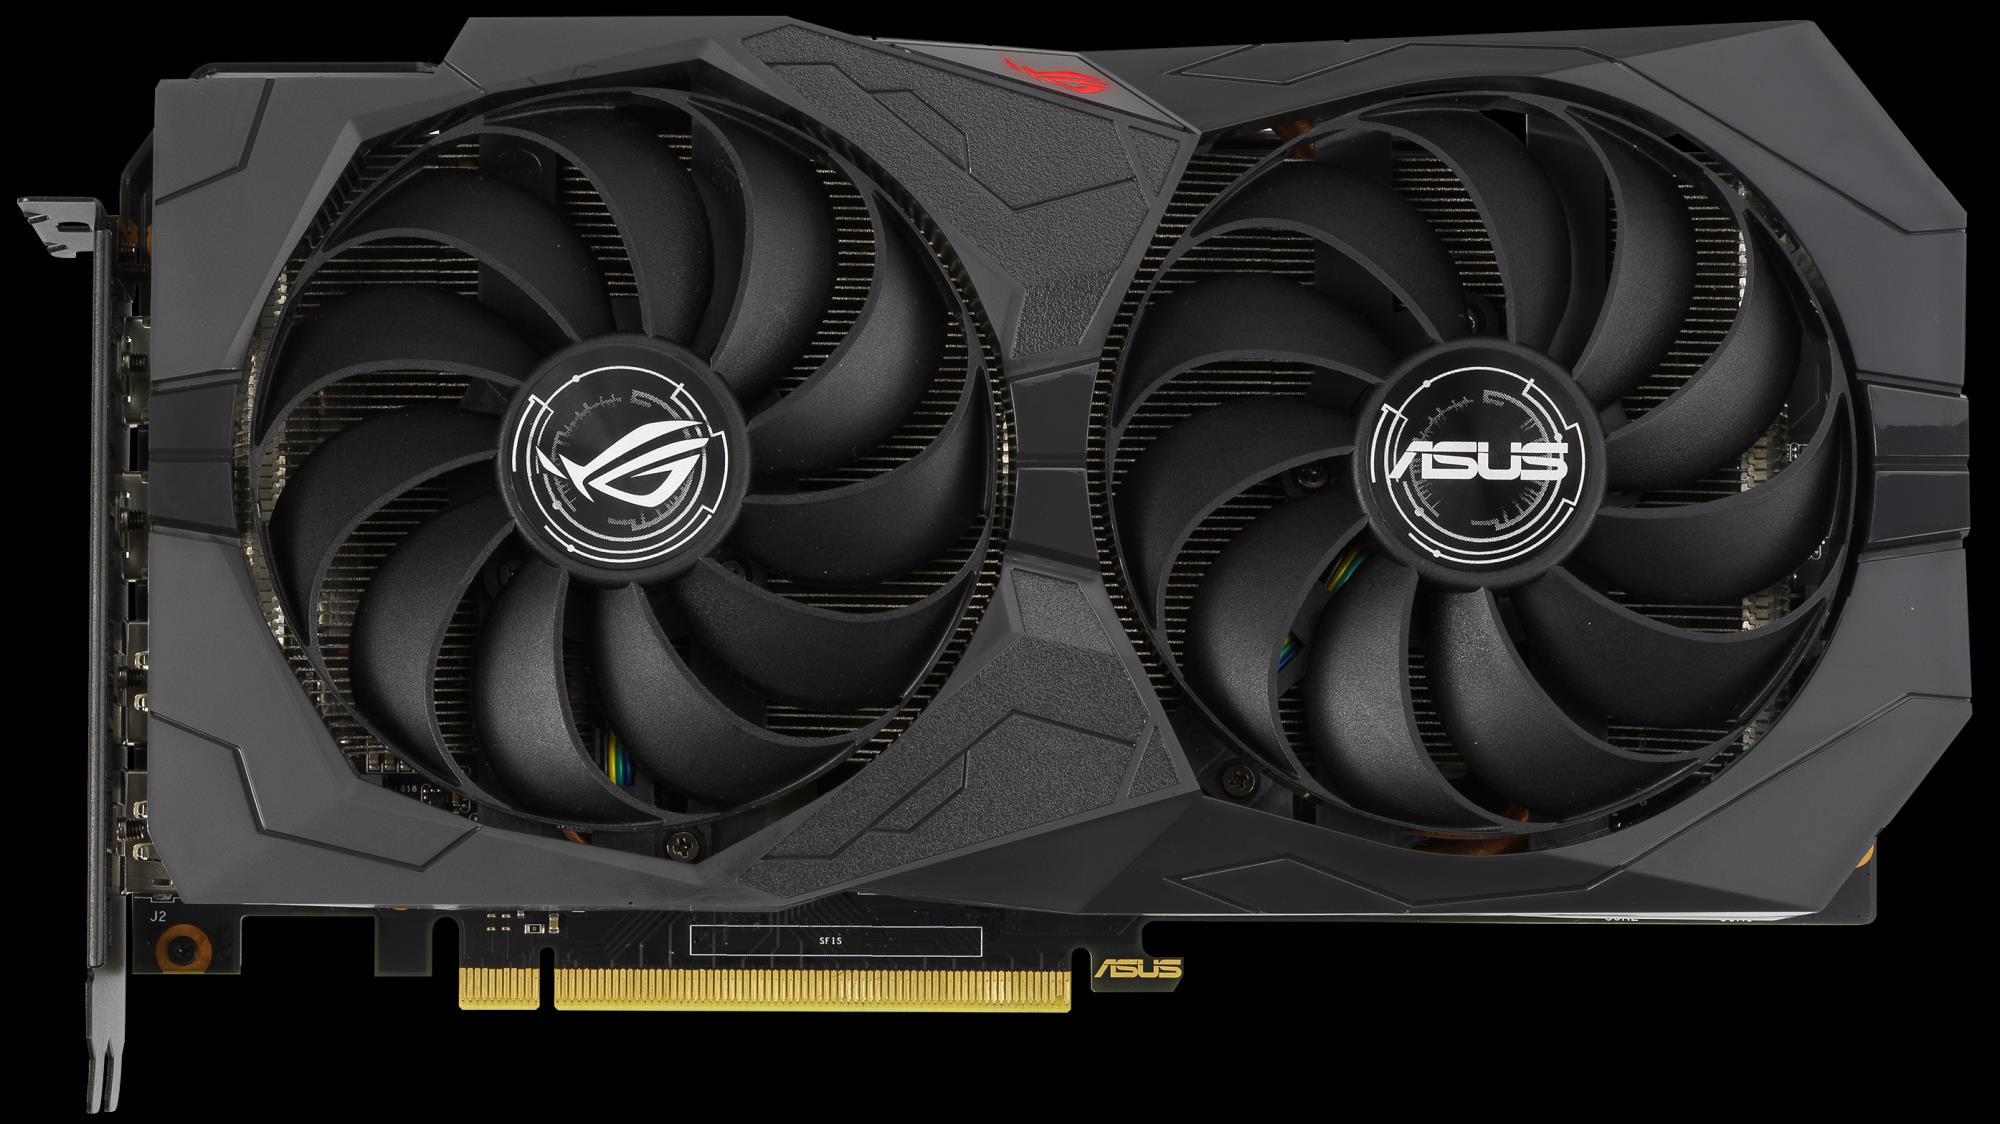 GeForce GTX 1660 SUPER and GTX 1650 SUPER graphics cards from ROG and ASUS  power up Full HD gaming | ROG - Republic of Gamers Global